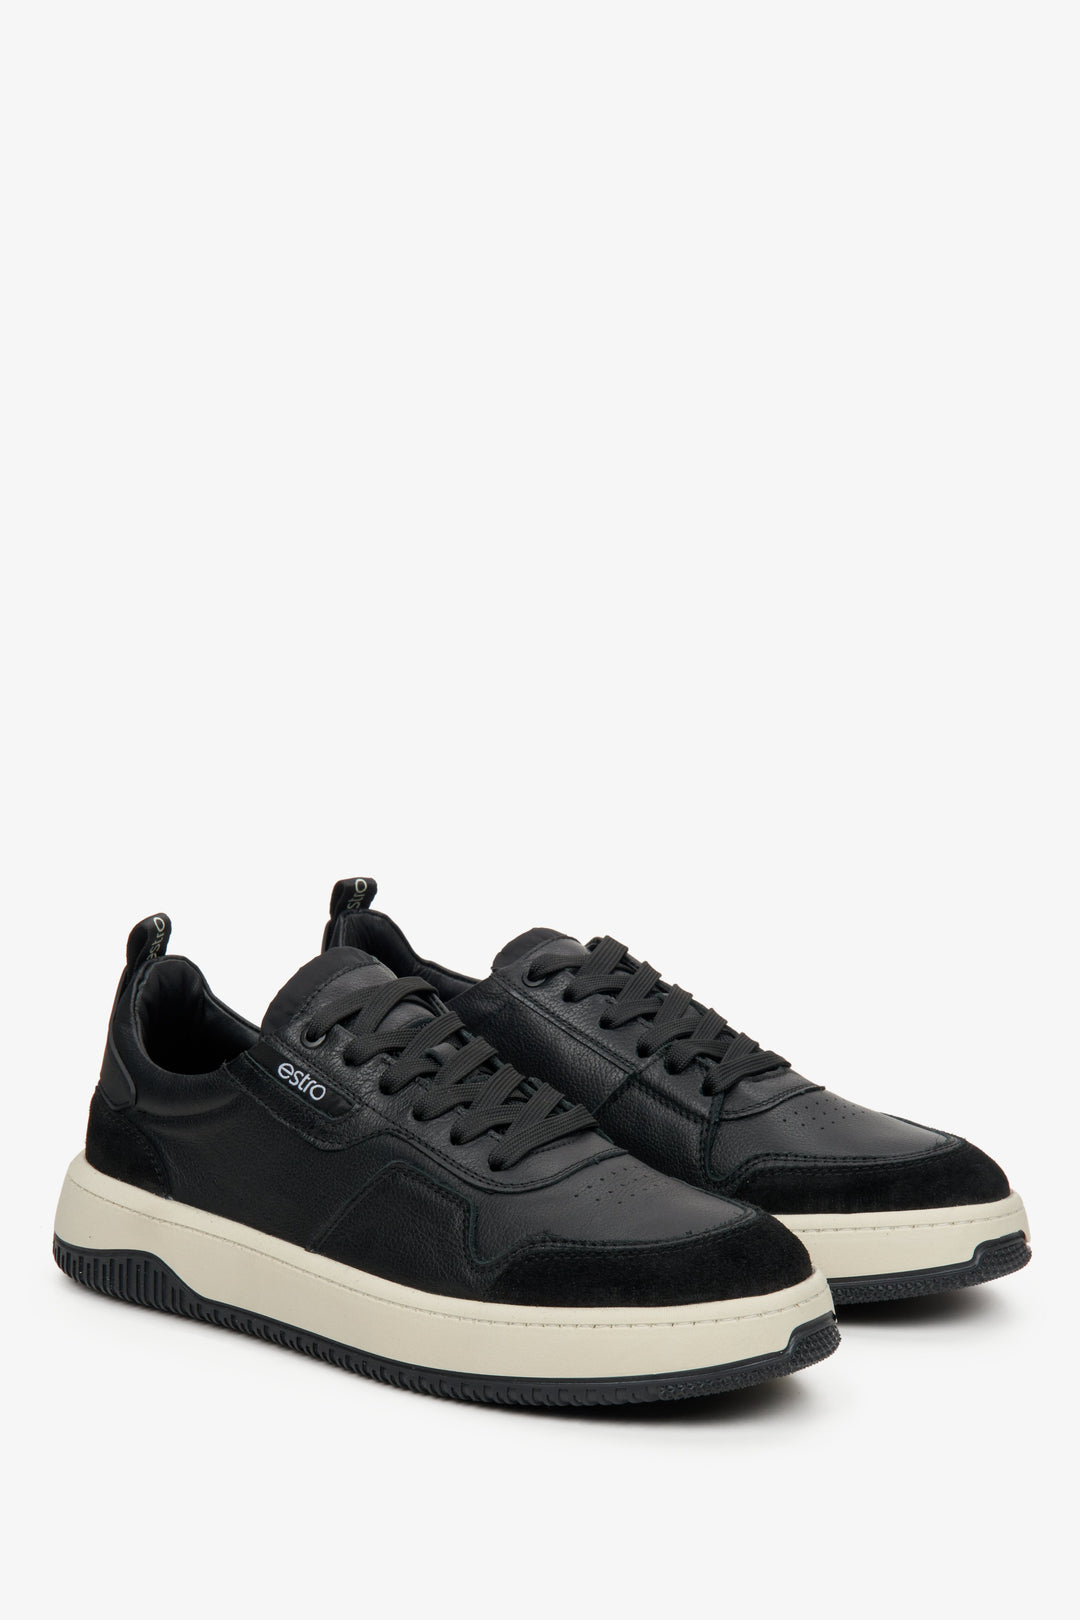 Men's black low-top sneakers made with leather and velour.